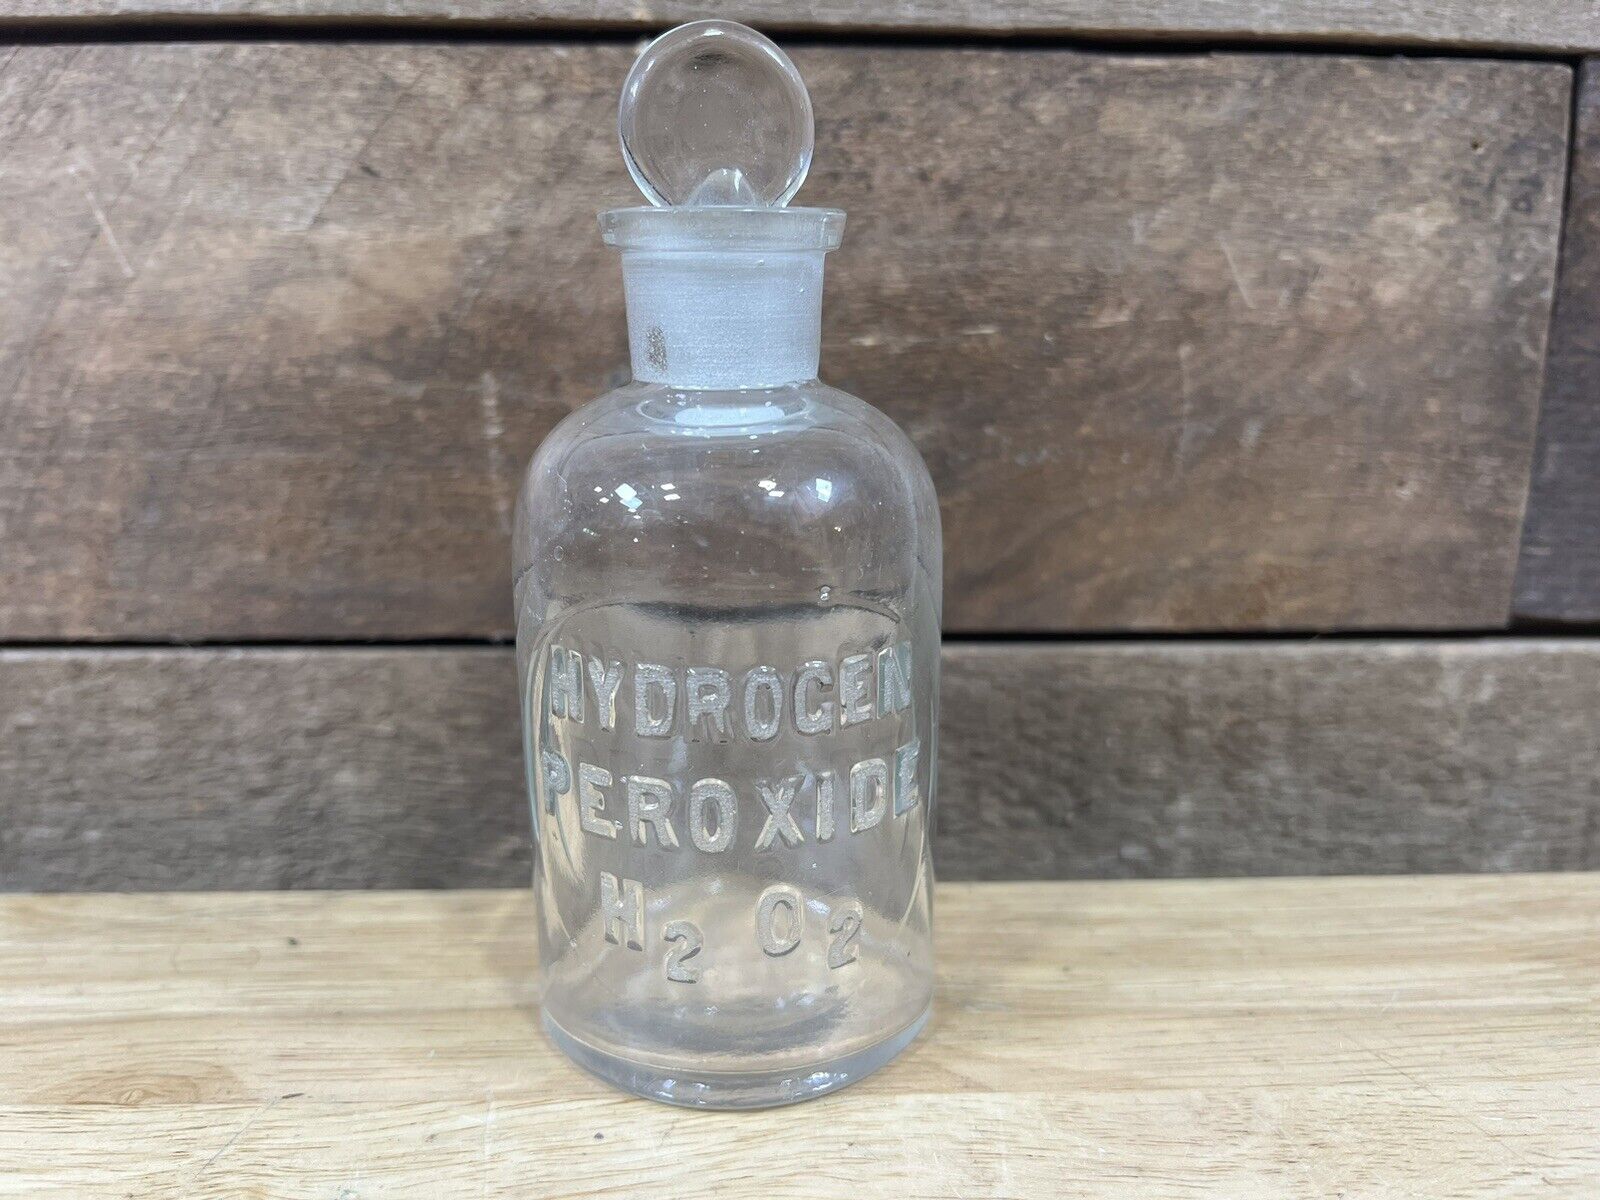 Vintage Laboratory Apothecary Hydrogen Peroxide Clear Glass Bottle